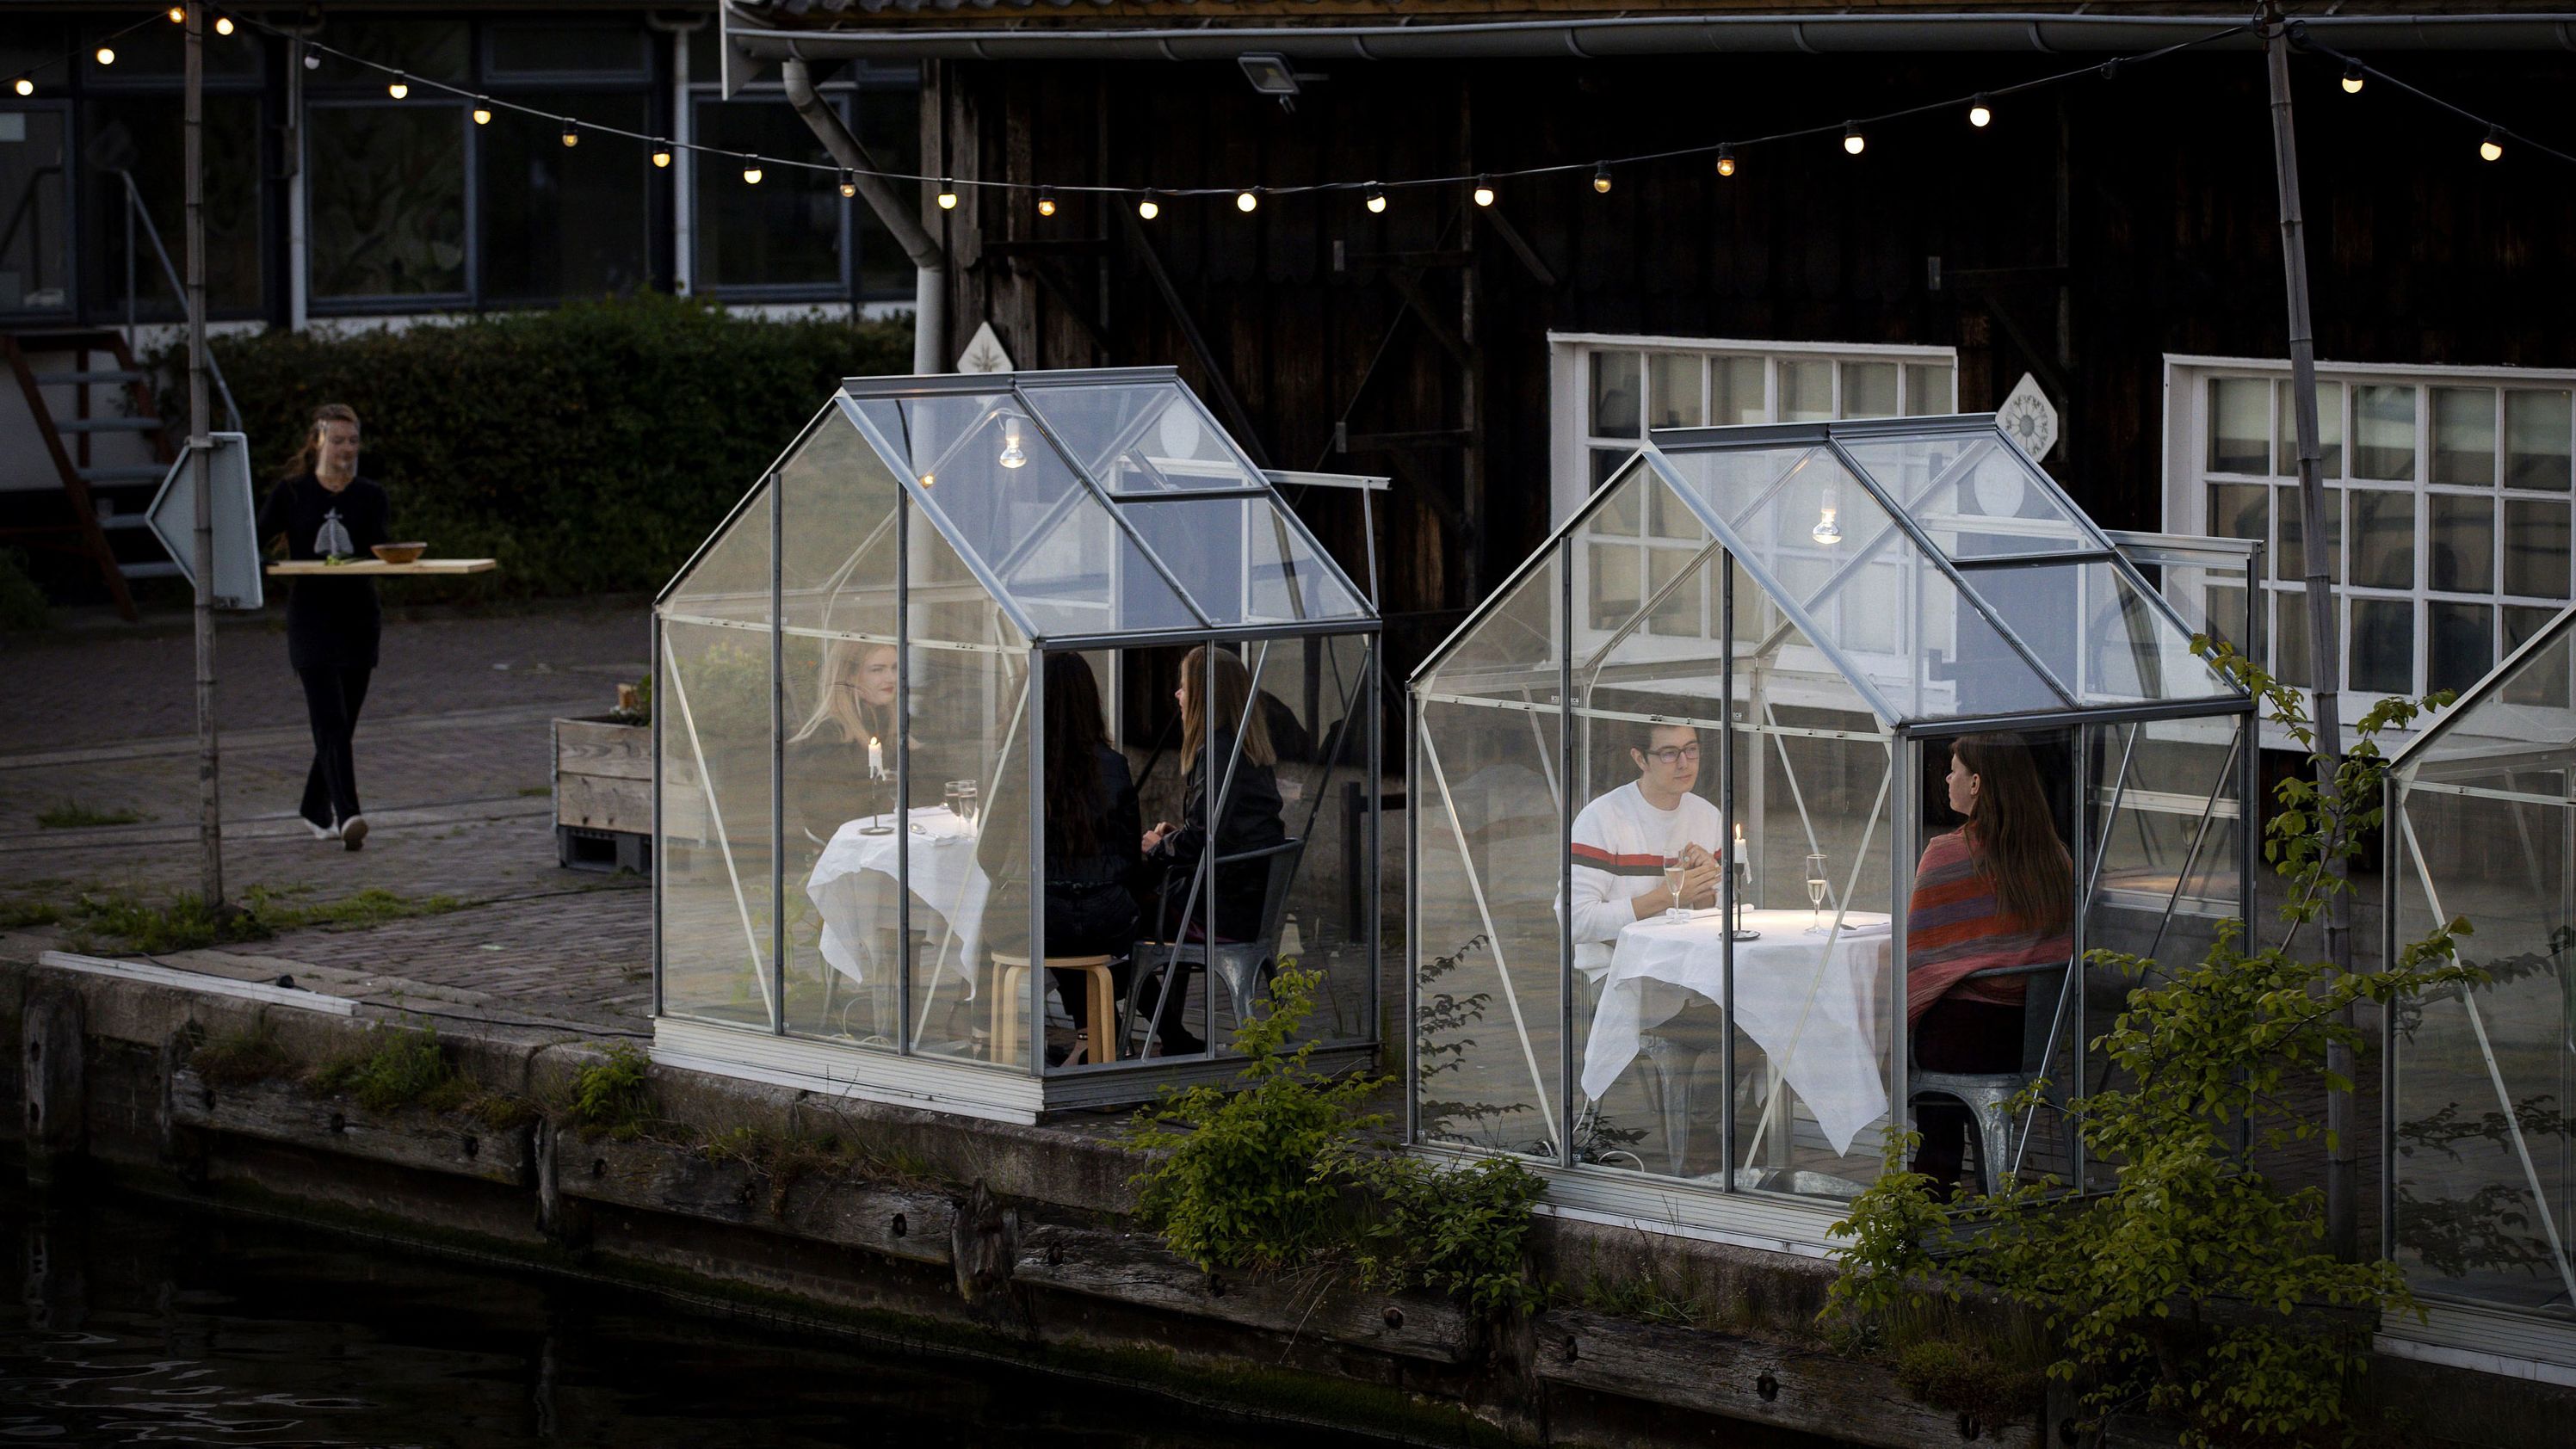 People have dinner in a so-called quarantine greenhouses in Amsterdam, on May 5, 2020 as the country fights against the spread of the COVID-19, the novel coronavirus. 